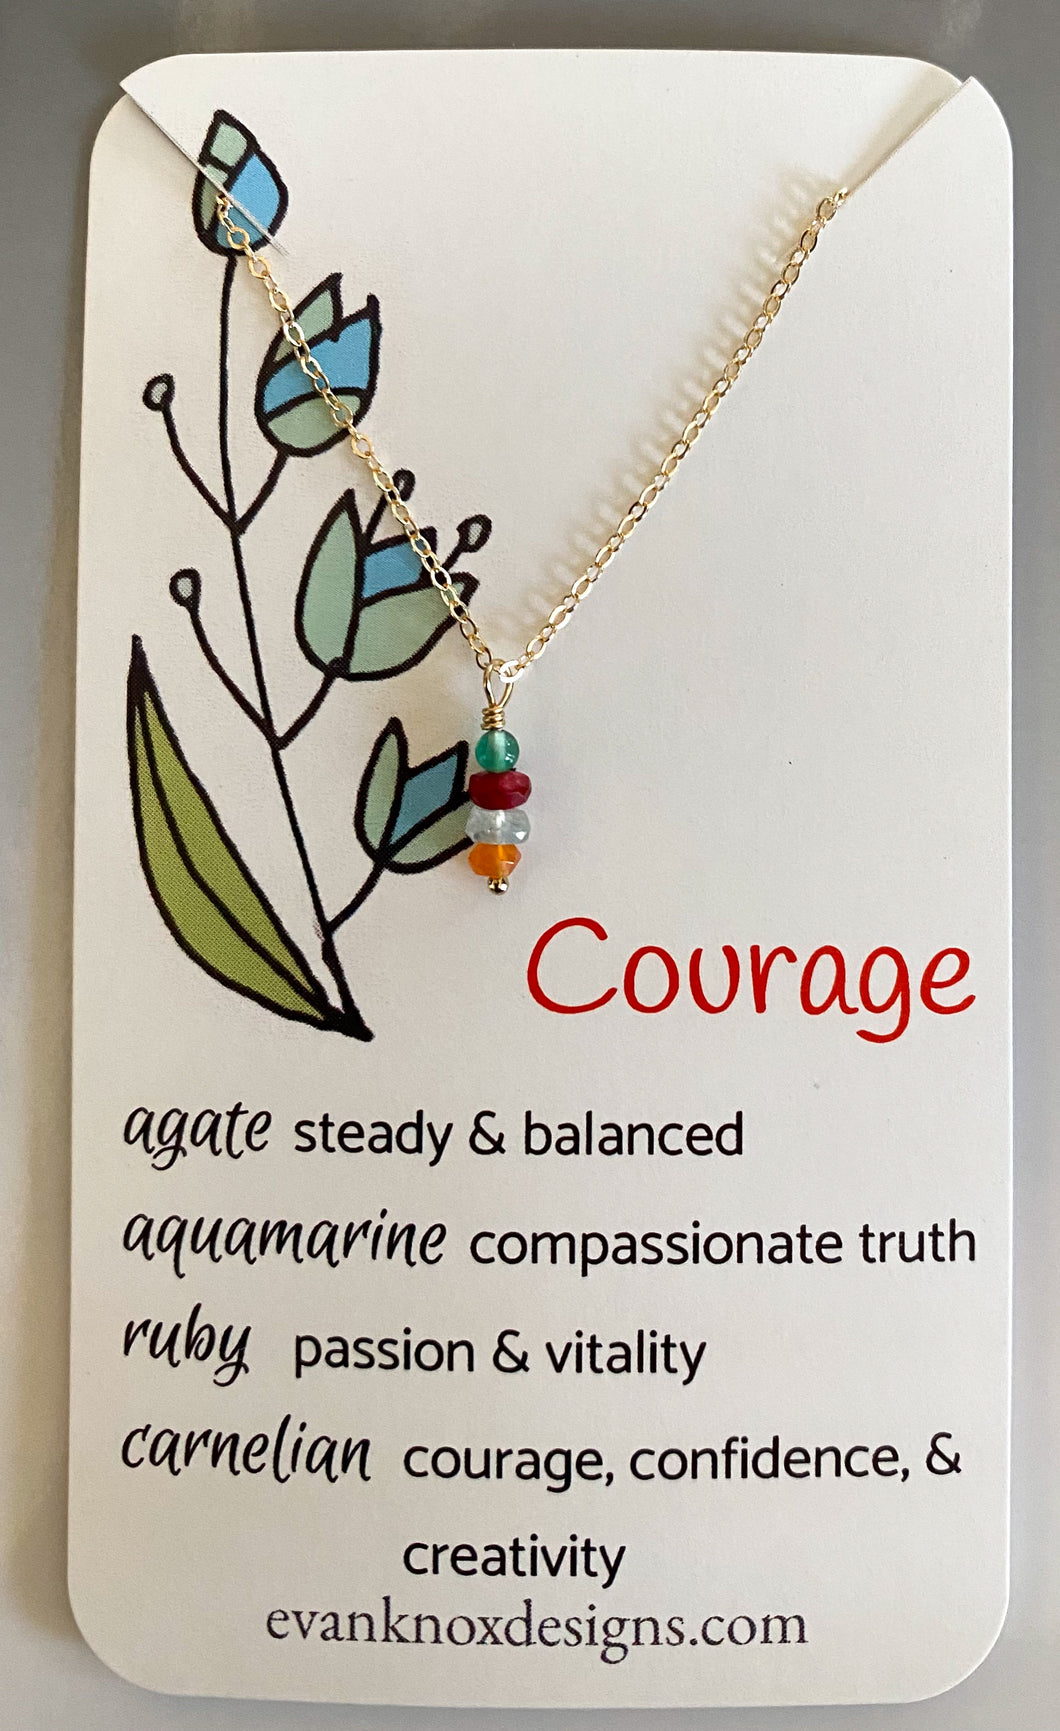 Courage necklace in gold